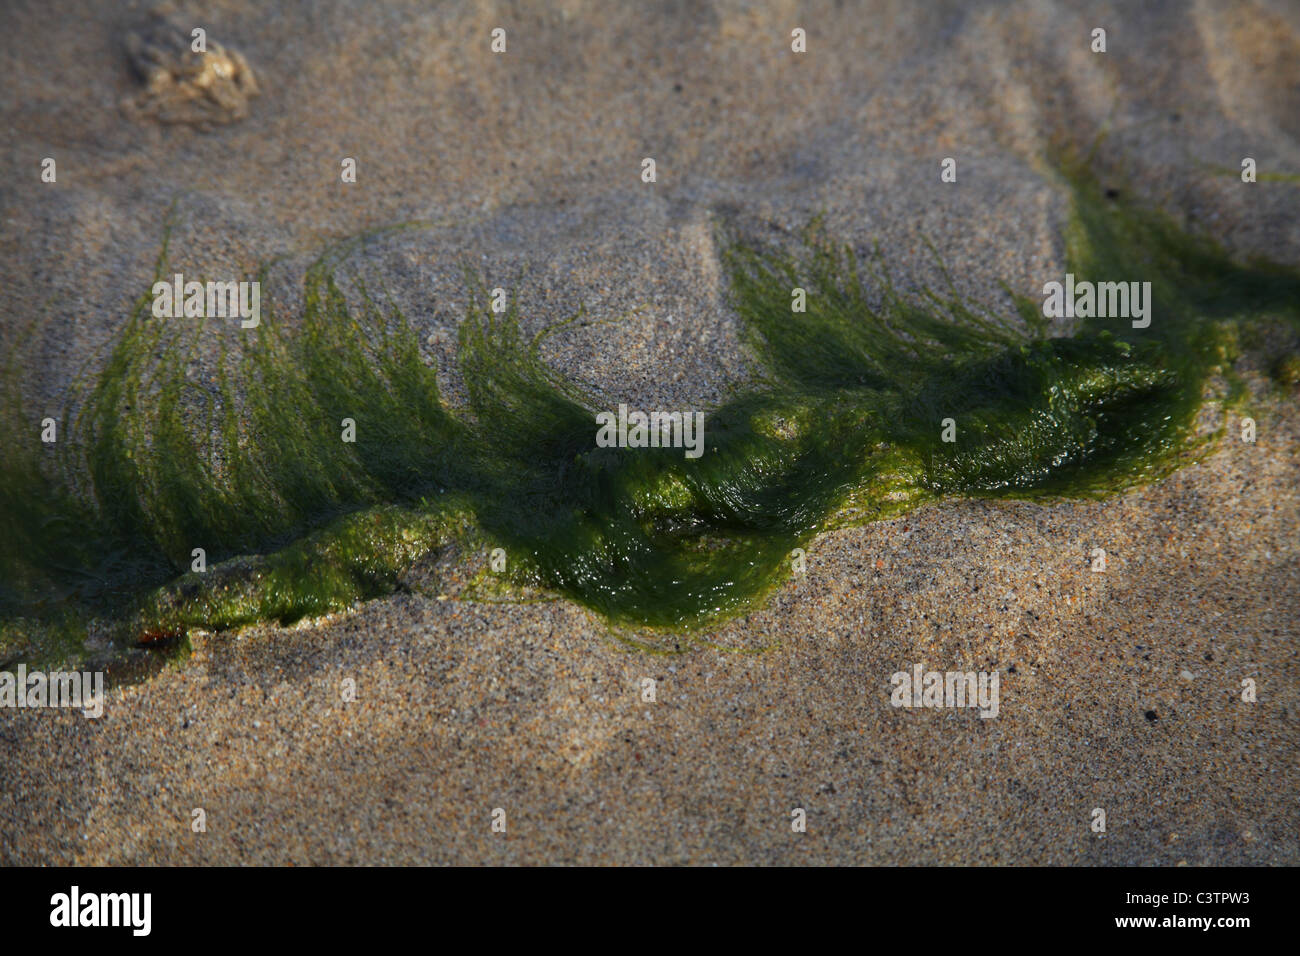 Sea weed clinging to a mooring chain, St Ives Harbour, Cornwall Stock Photo